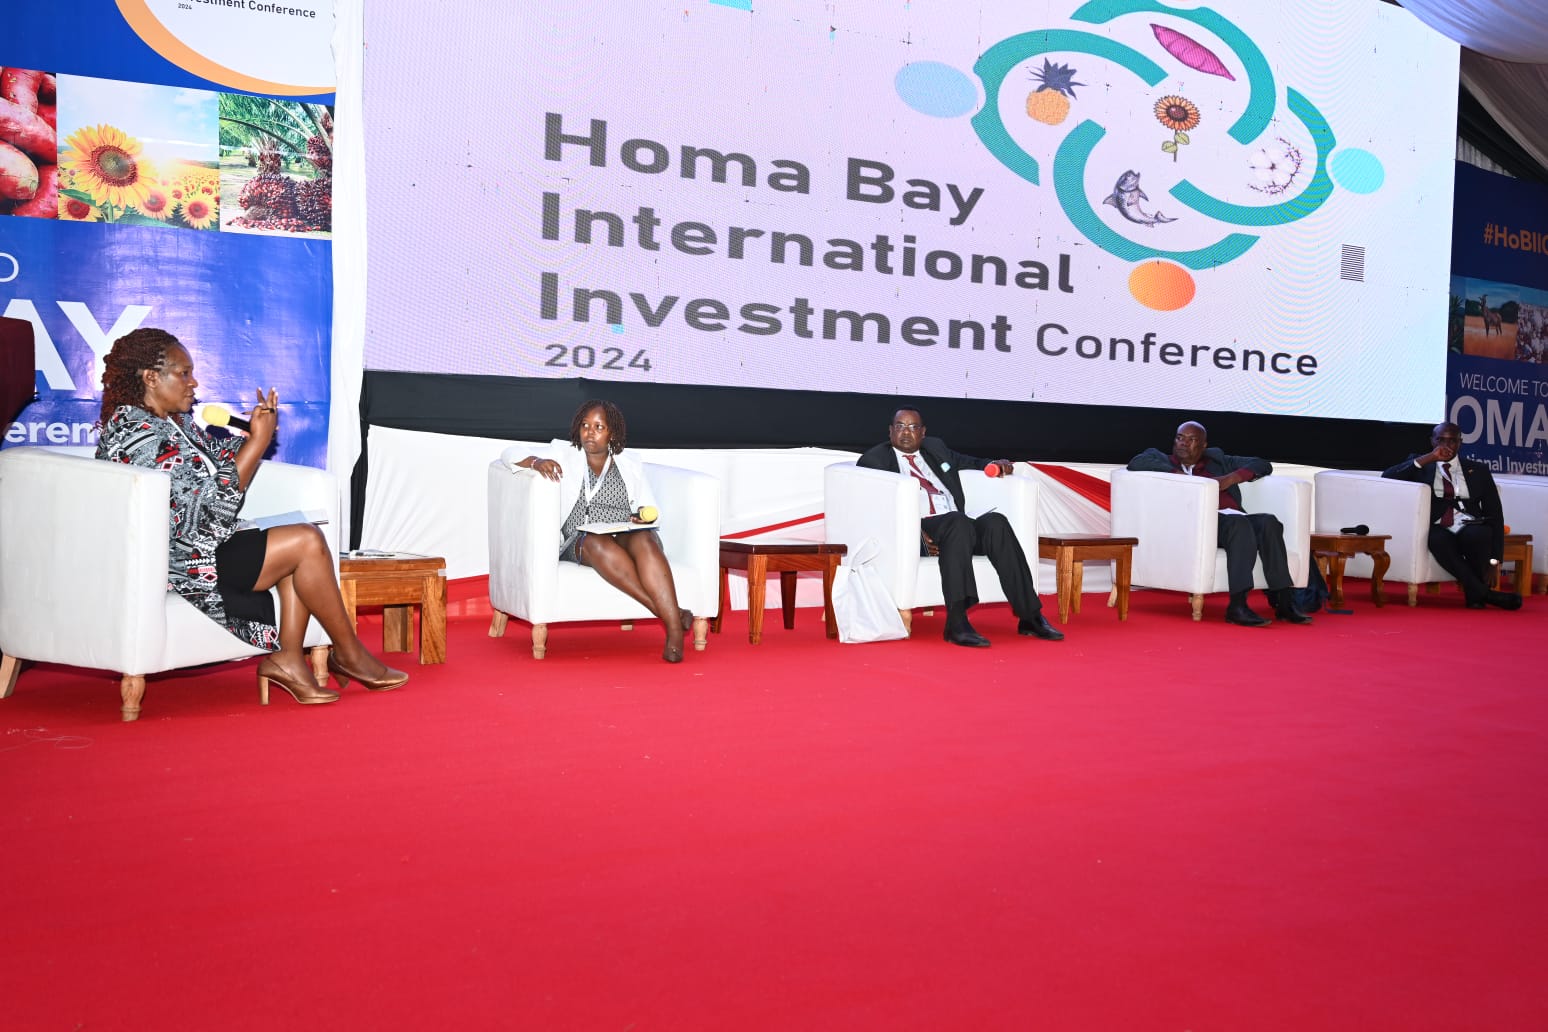 Homa Bay International Investment Conference